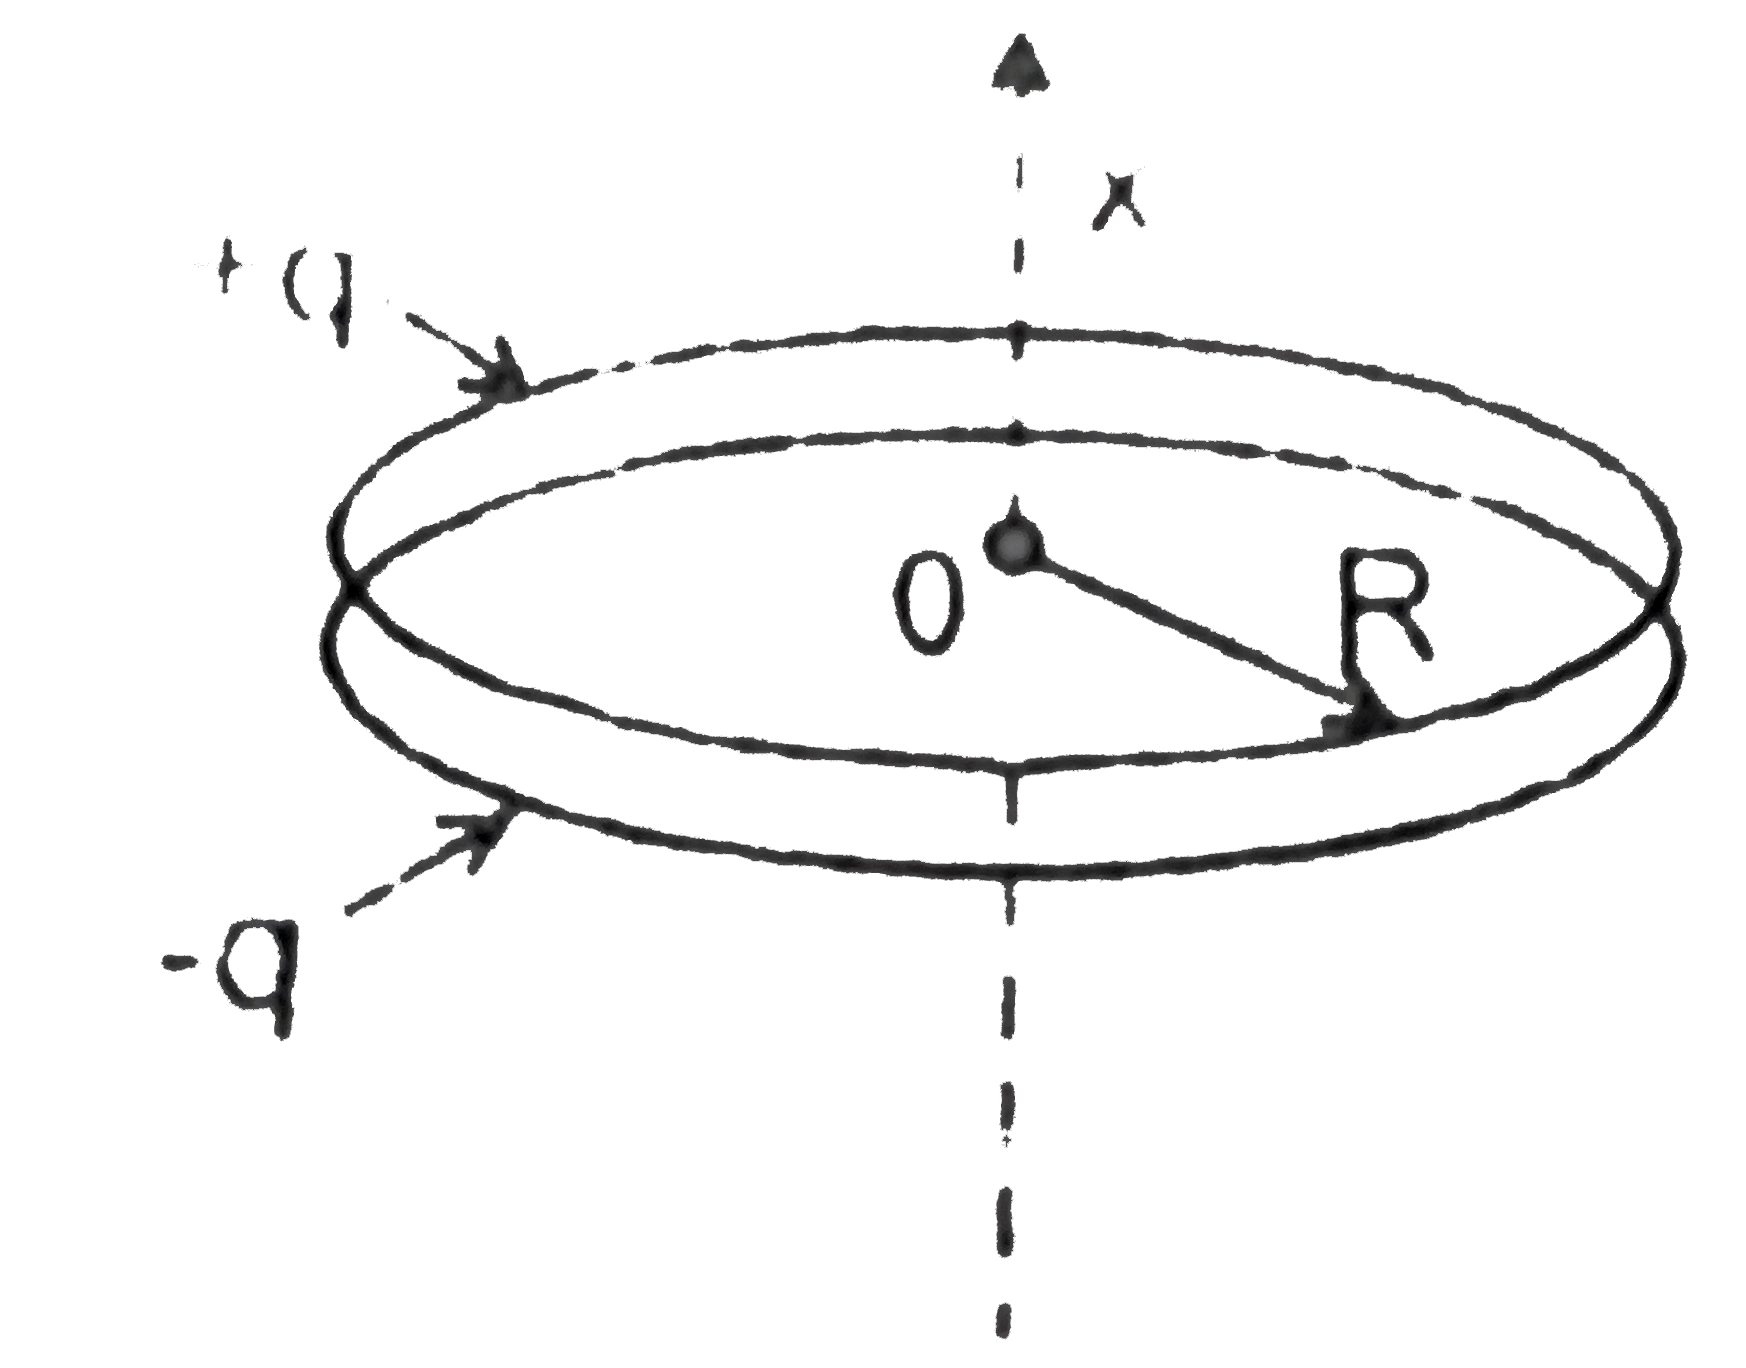 Two coaxial rings, each of radius R, made of thin wire are separated by a small distance l(l lt lt R) and carry the charges q and -q. Find the electric field potential and strength at the axis of the system as a function of the x coordinate (see figure). Investigate these functions at |x| gt gt R